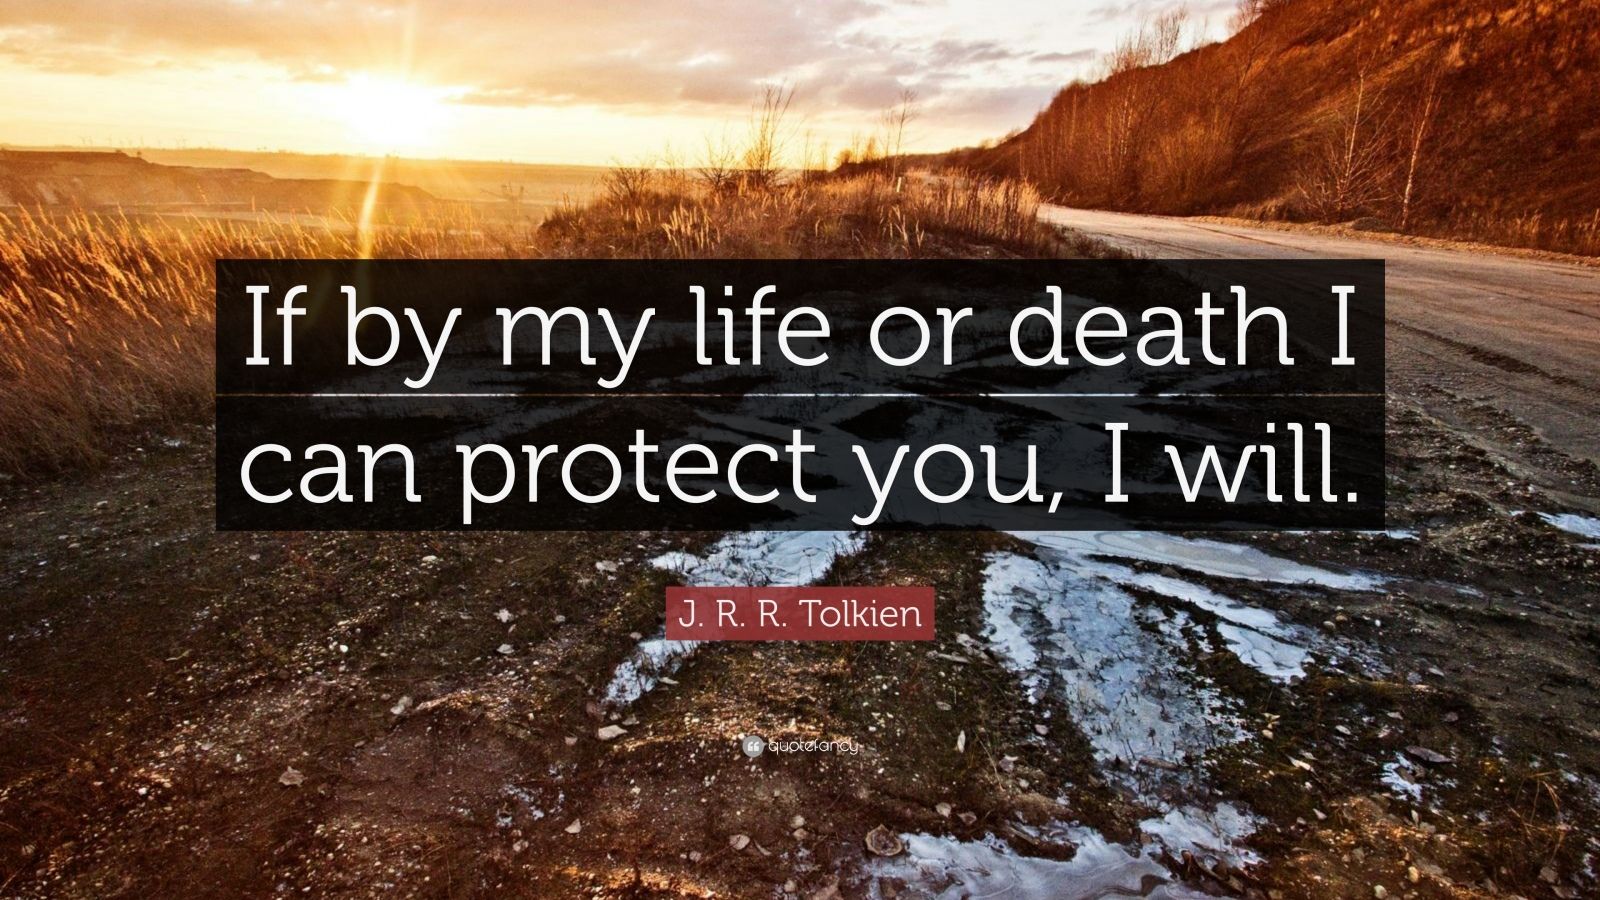 J. R. R. Tolkien Quote: “If by my life or death I can protect you, I will.”